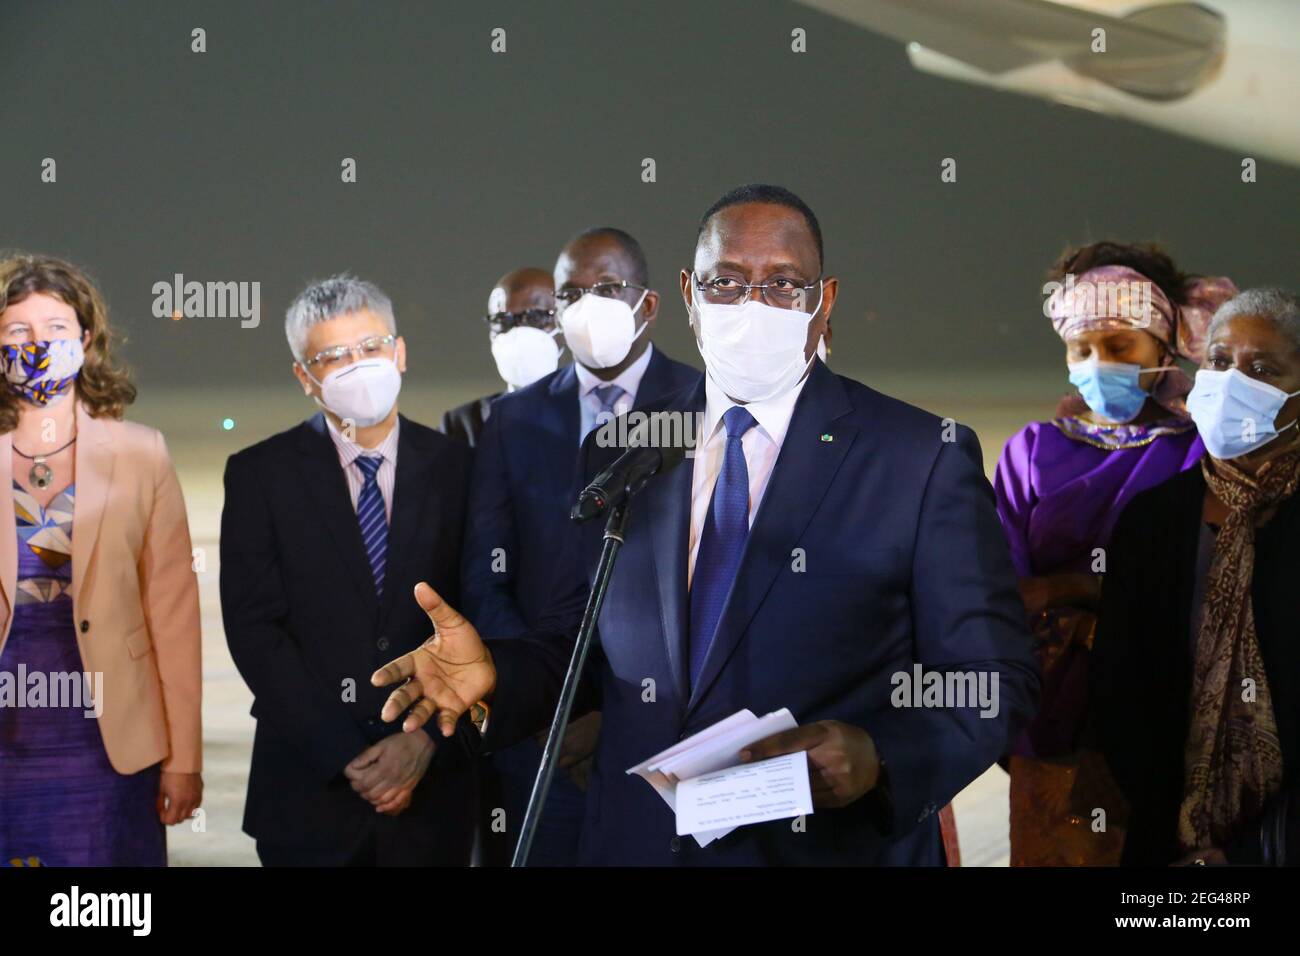 Dakar, Senegal. 17th Feb, 2021. Senegalese President Macky Sall (front) speaks during the delivery ceremony of the first batch of China's Sinopharm COVID-19 vaccine at Blaise Diagne International Airport in Dakar, Senegal, Feb. 17, 2021. Senegal on Wednesday night received the first batch of China's Sinopharm COVID-19 vaccine. Credit: Xing Jianqiao/Xinhua/Alamy Live News Stock Photo